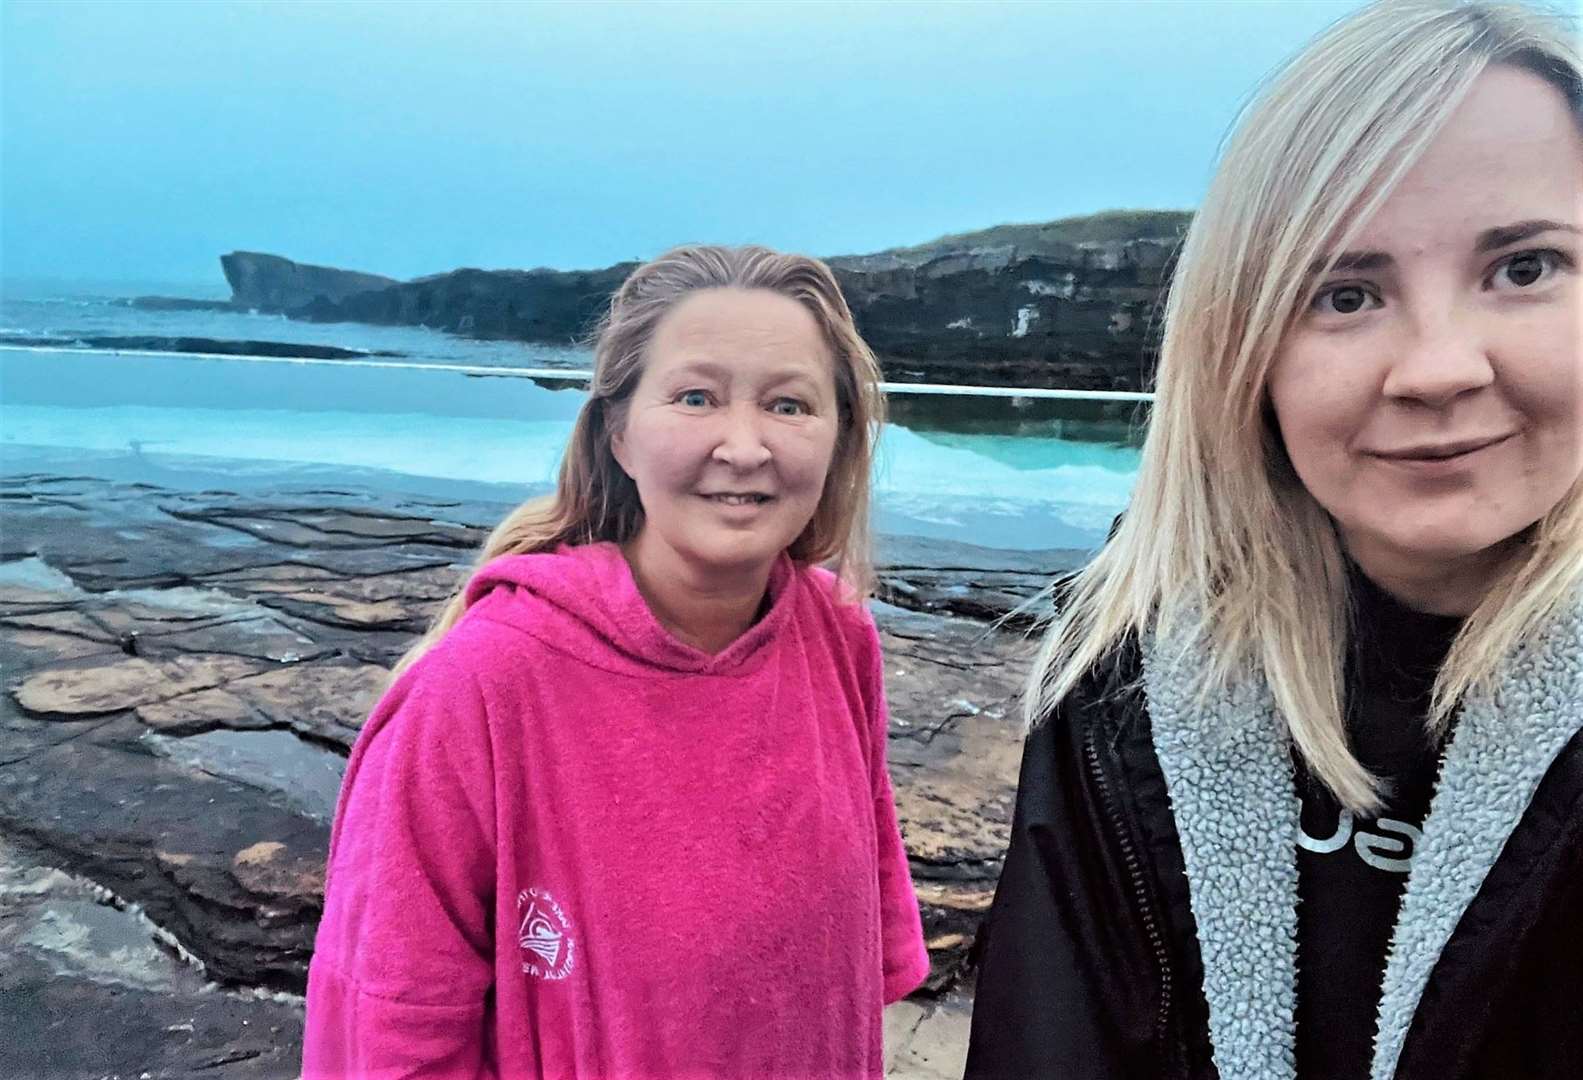 Davina Lyall (left) and Melissa Green braved the elements to swim at the Trinkie outdoor pool at Wick to witness the solstice sunrise. They were the first brave souls to arrive at around 4am on Wednesday.